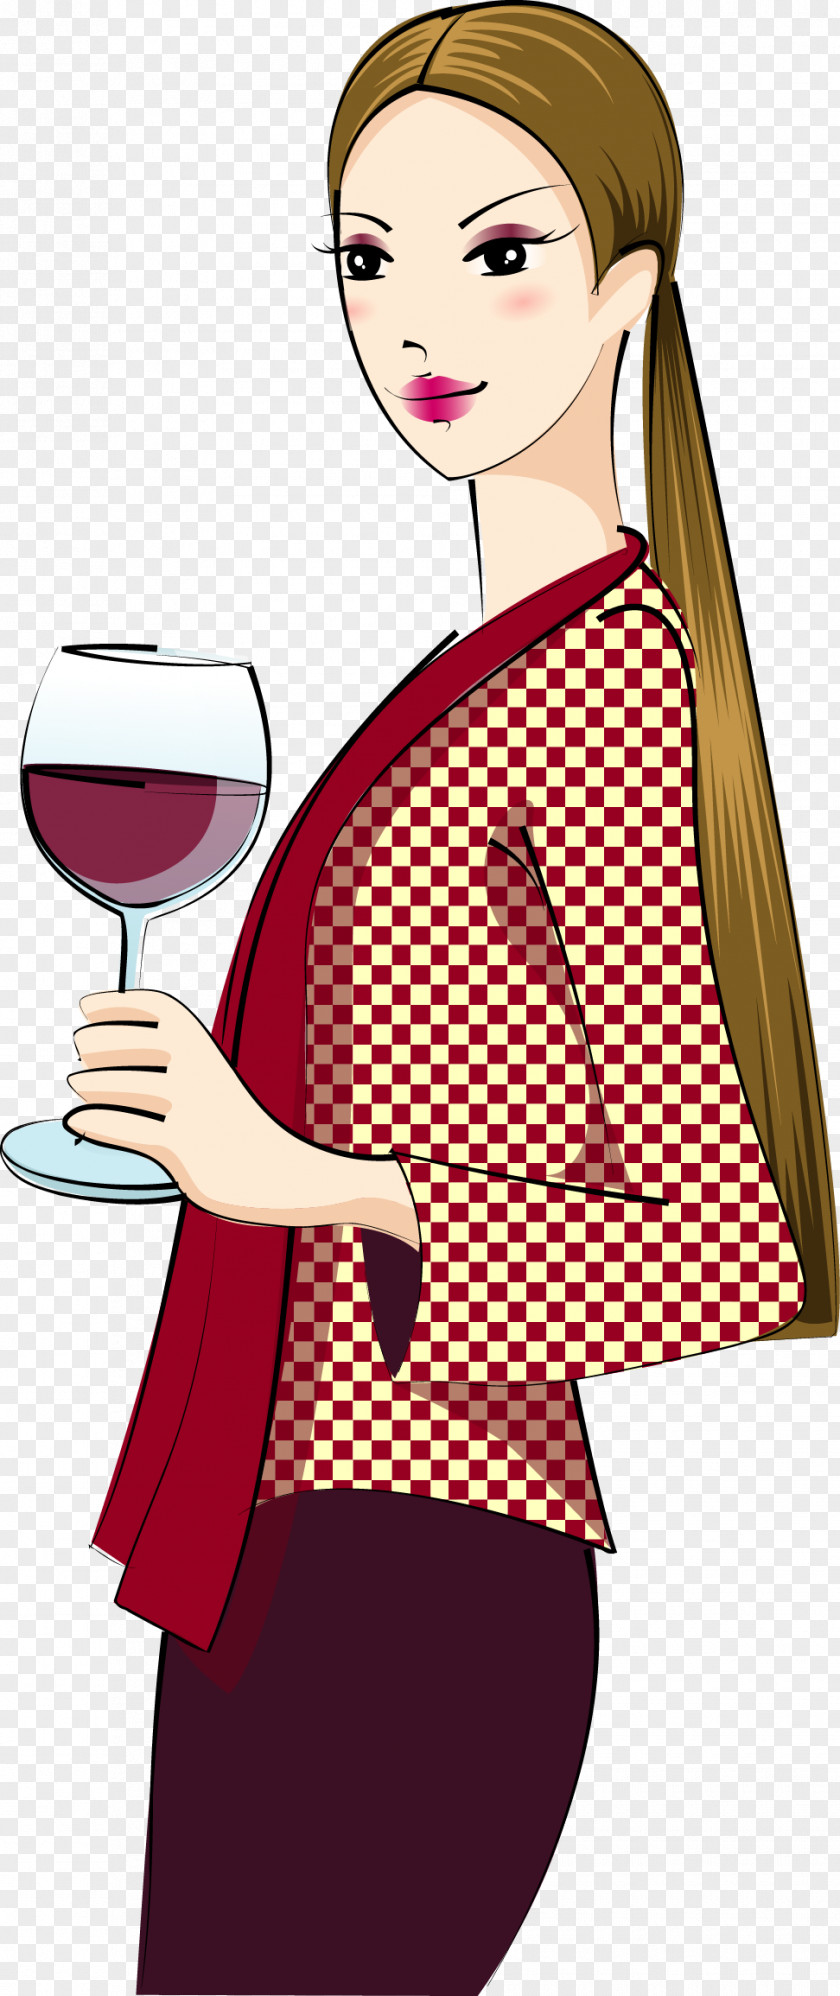 A Woman Holding Red Wine Glass PNG